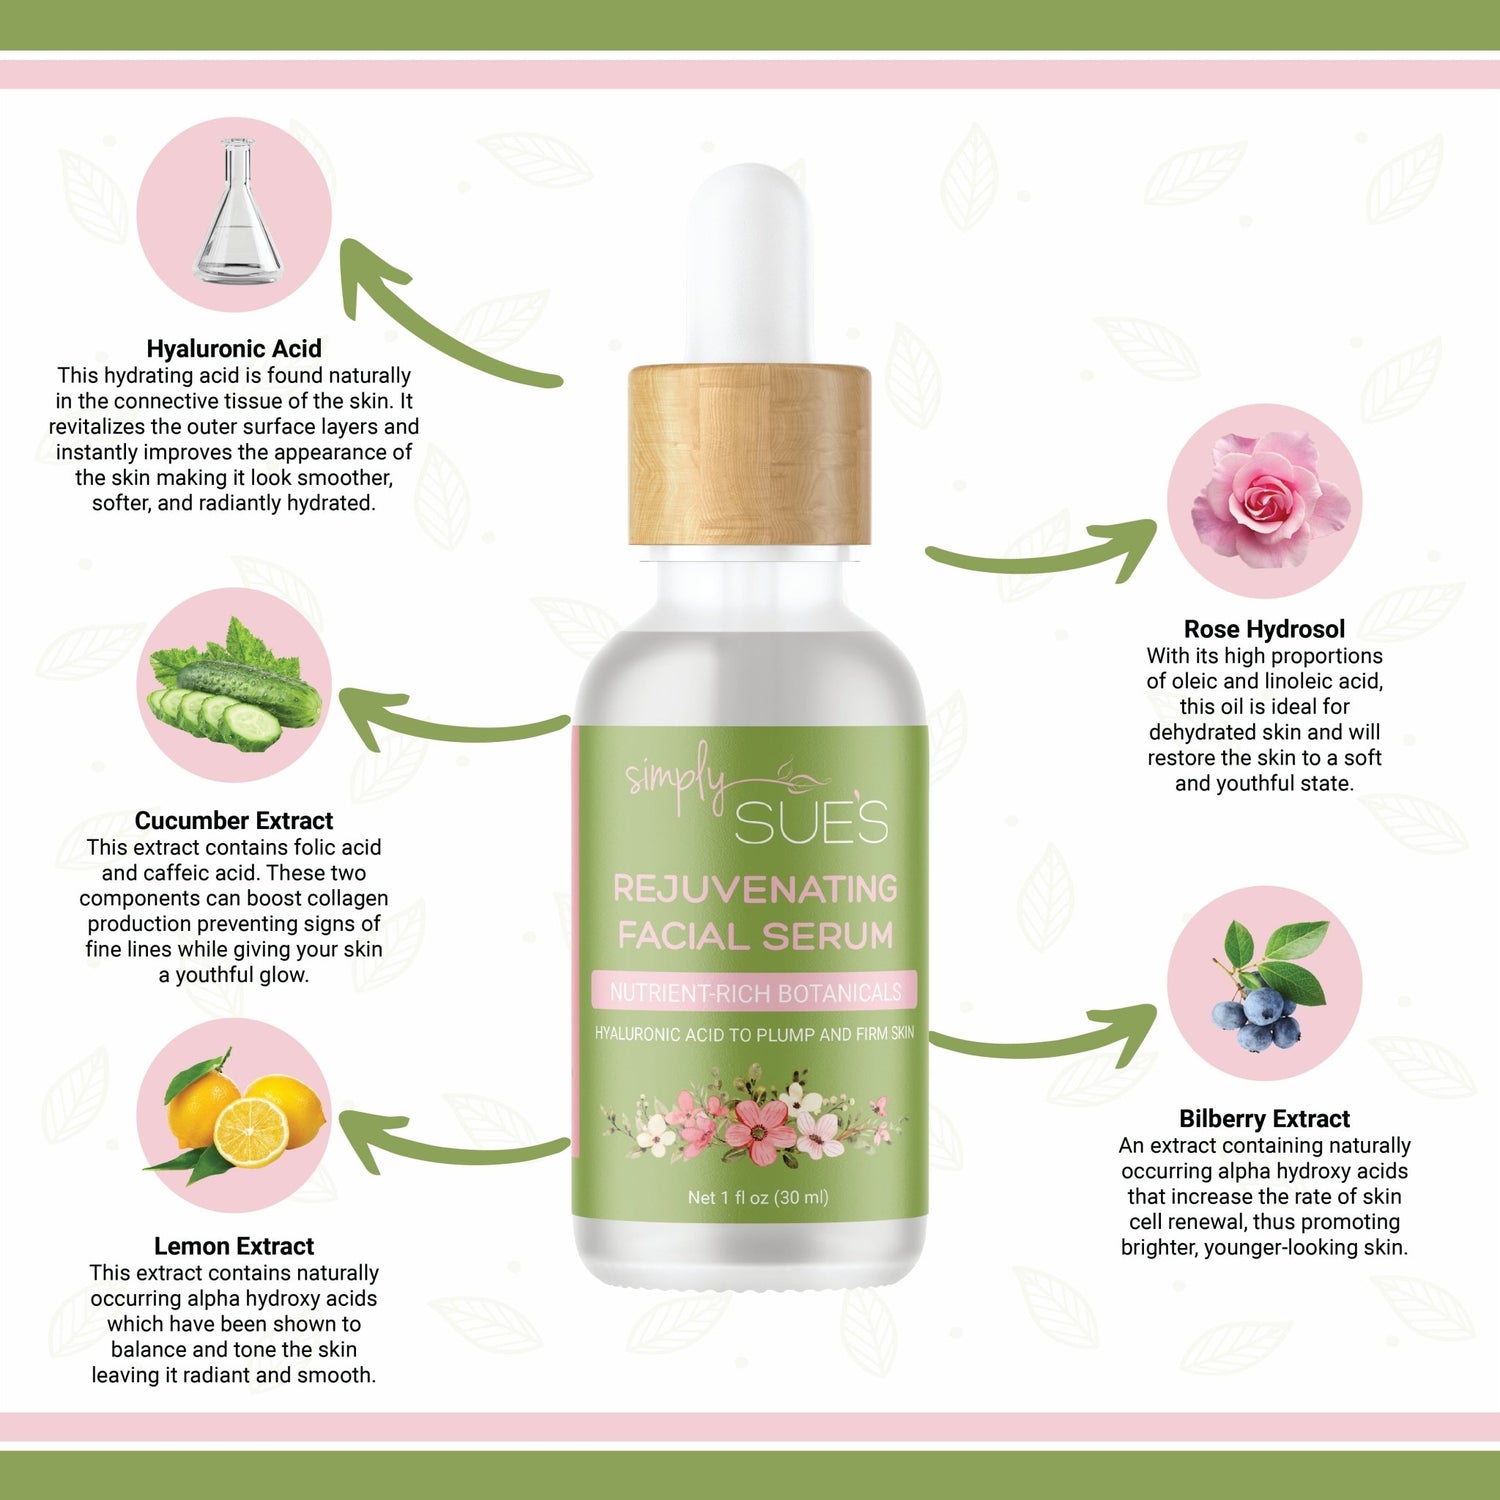 Graphic showing some of the ingredients in Simply Sue&